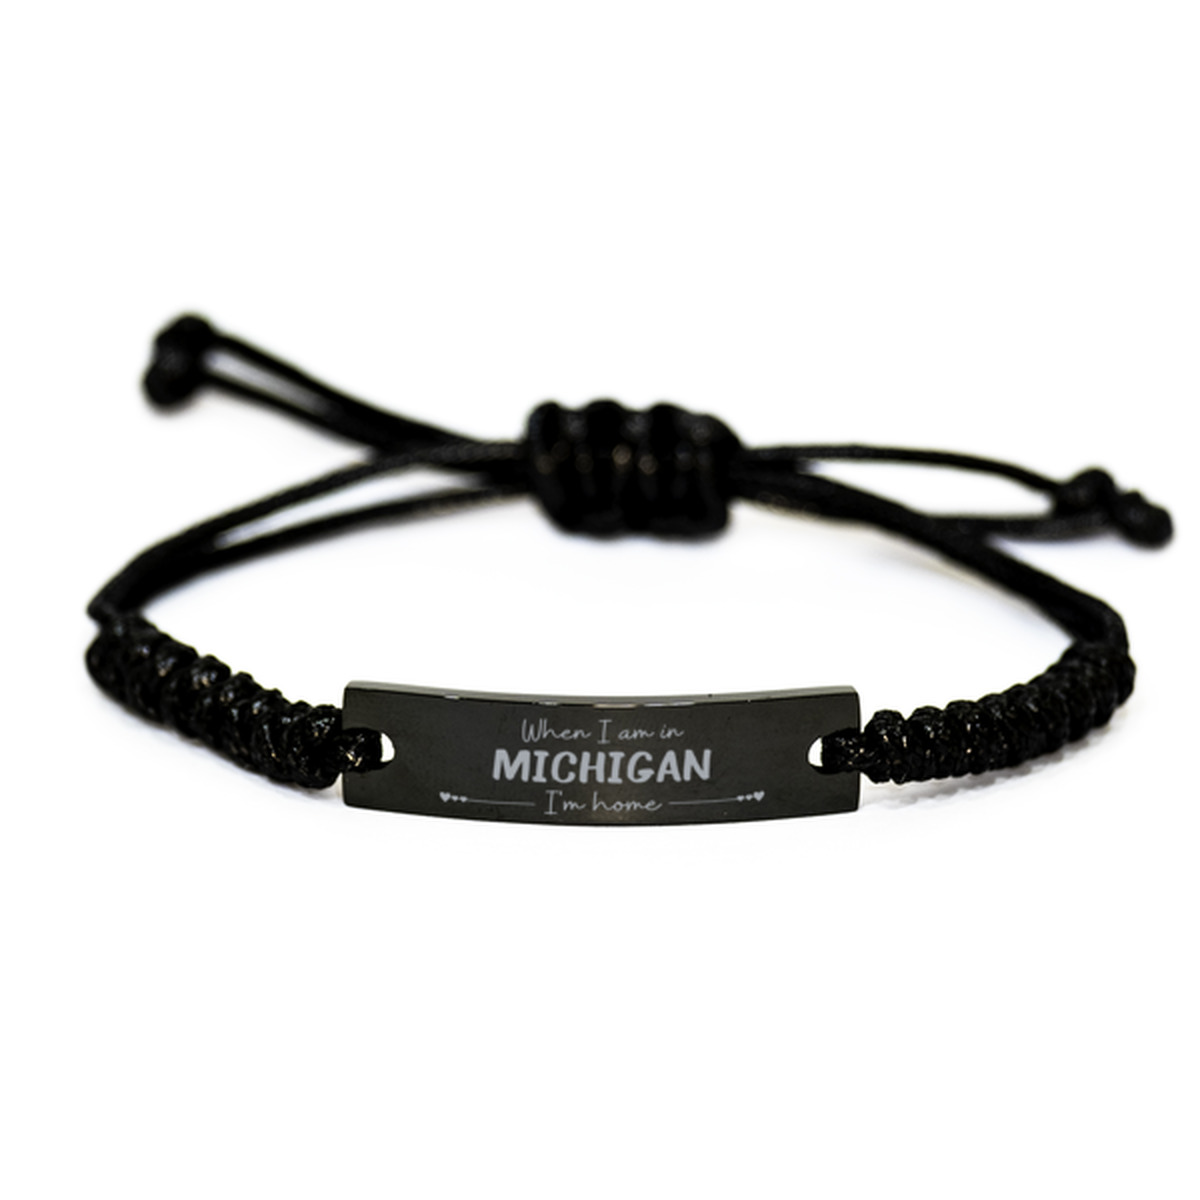 When I am in Michigan I'm home Black Rope Bracelet, Cheap Gifts For Michigan, State Michigan Birthday Gifts for Friends Coworker